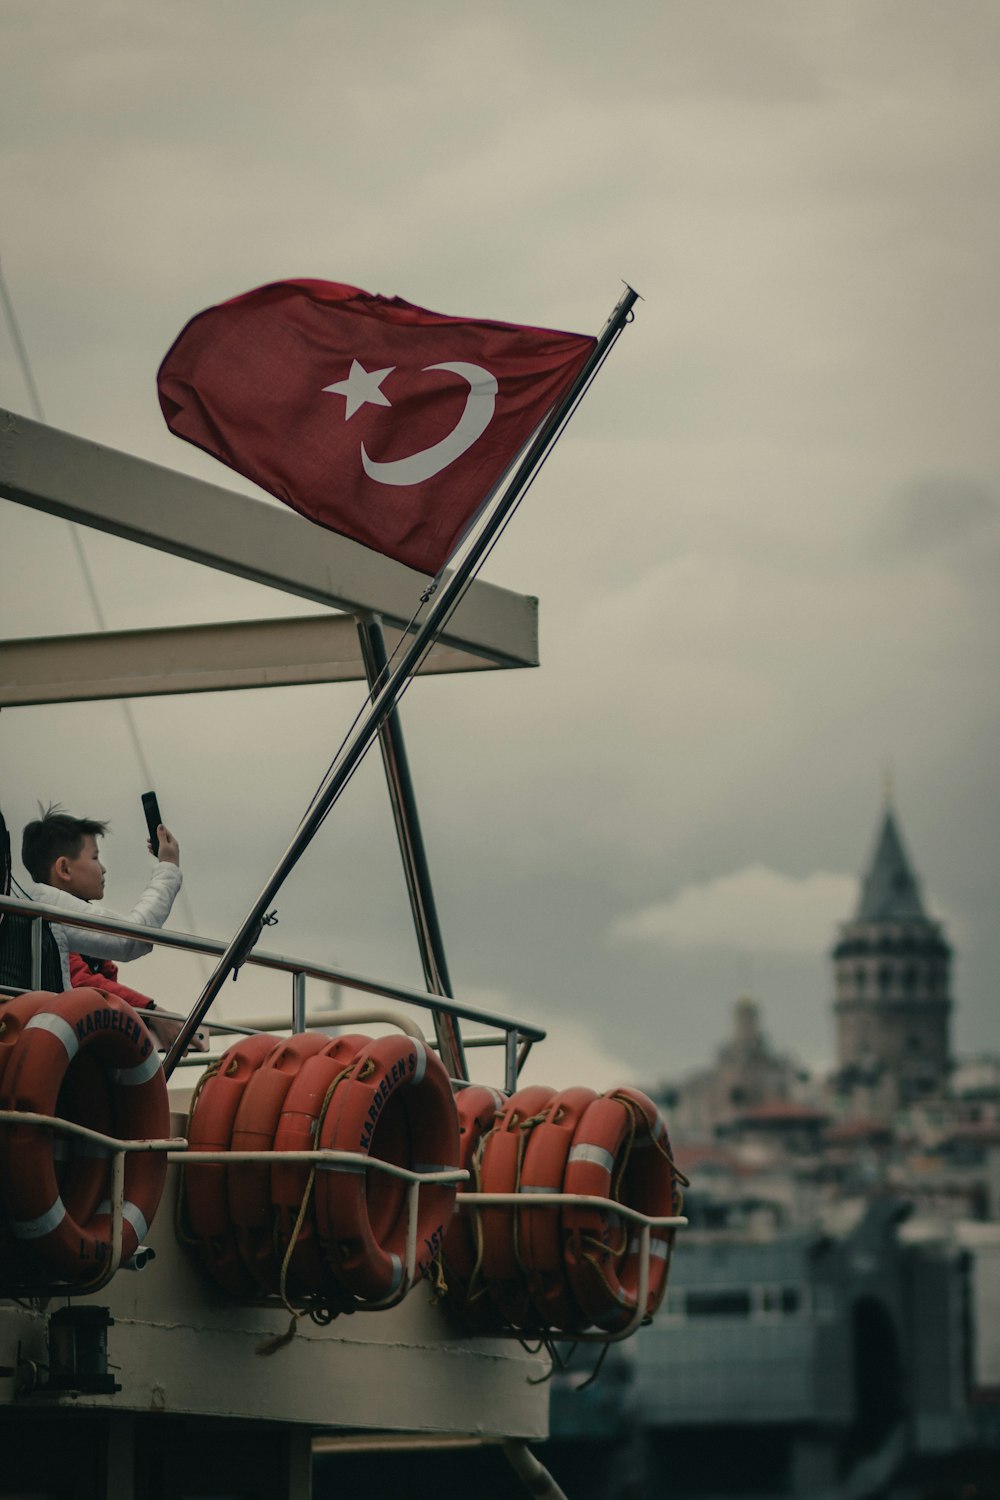 Turkish flag on pole on boat during day